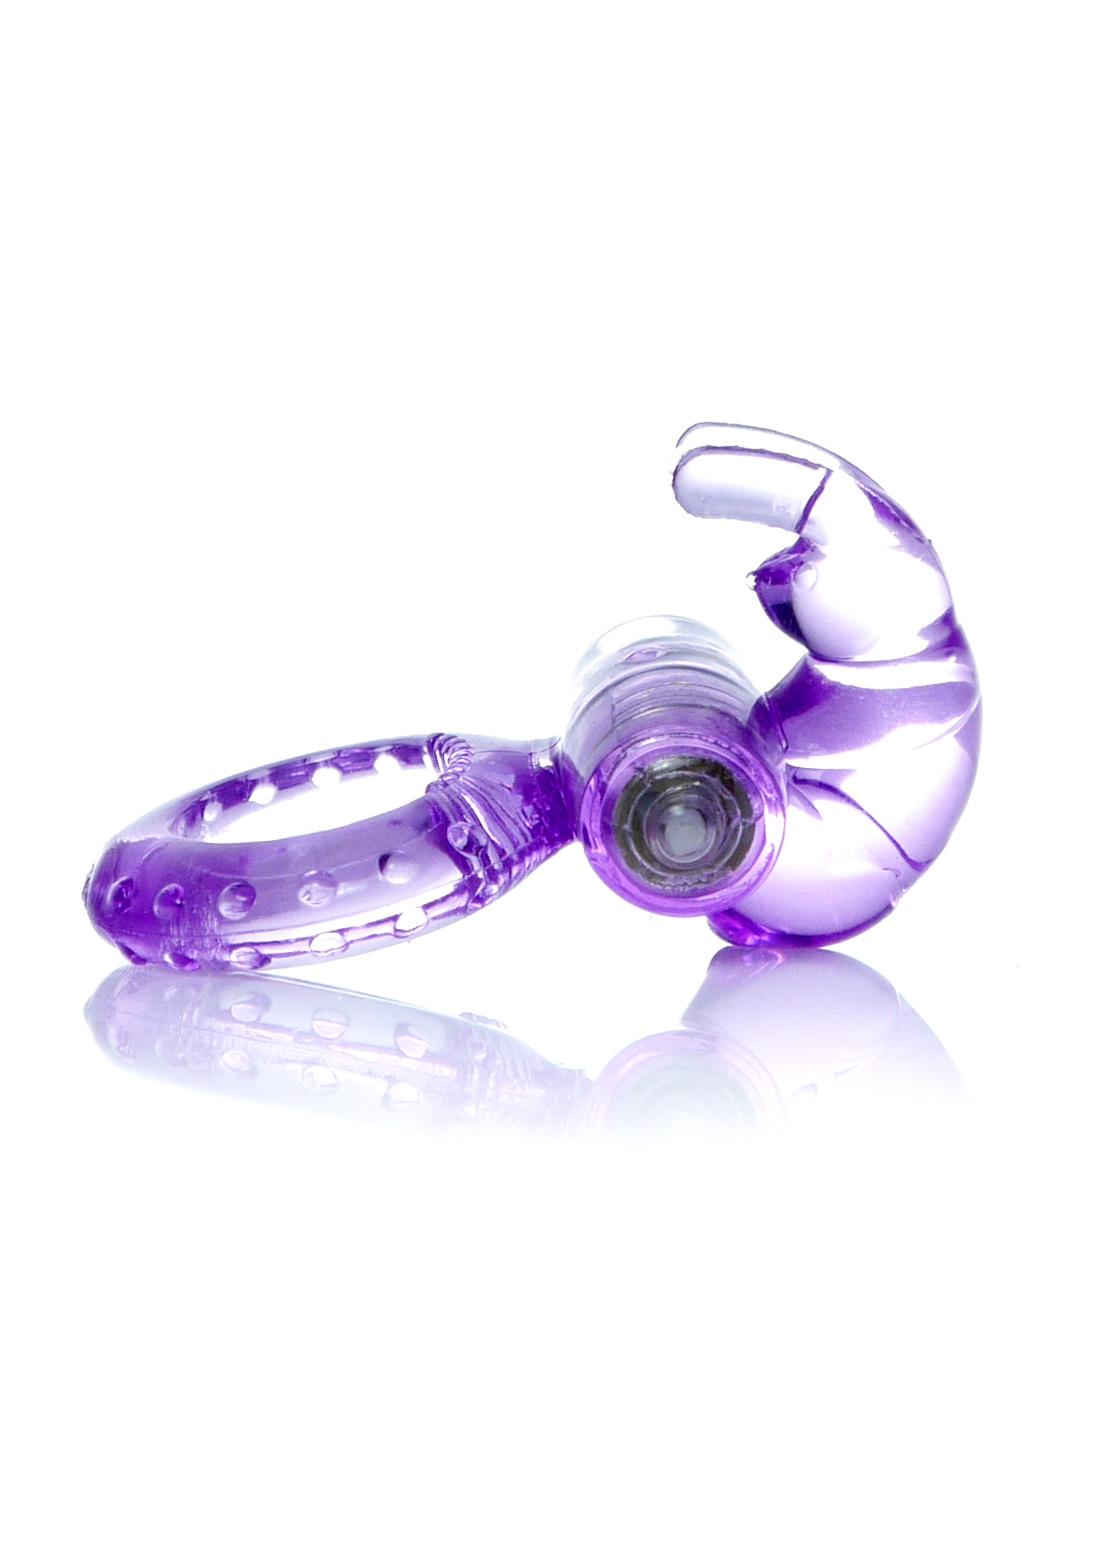 Bossoftoys - 67-00048 - Rabbit Vibrating Cockring  - 7,5 cm - Purple - batteries included - packed in strong blister